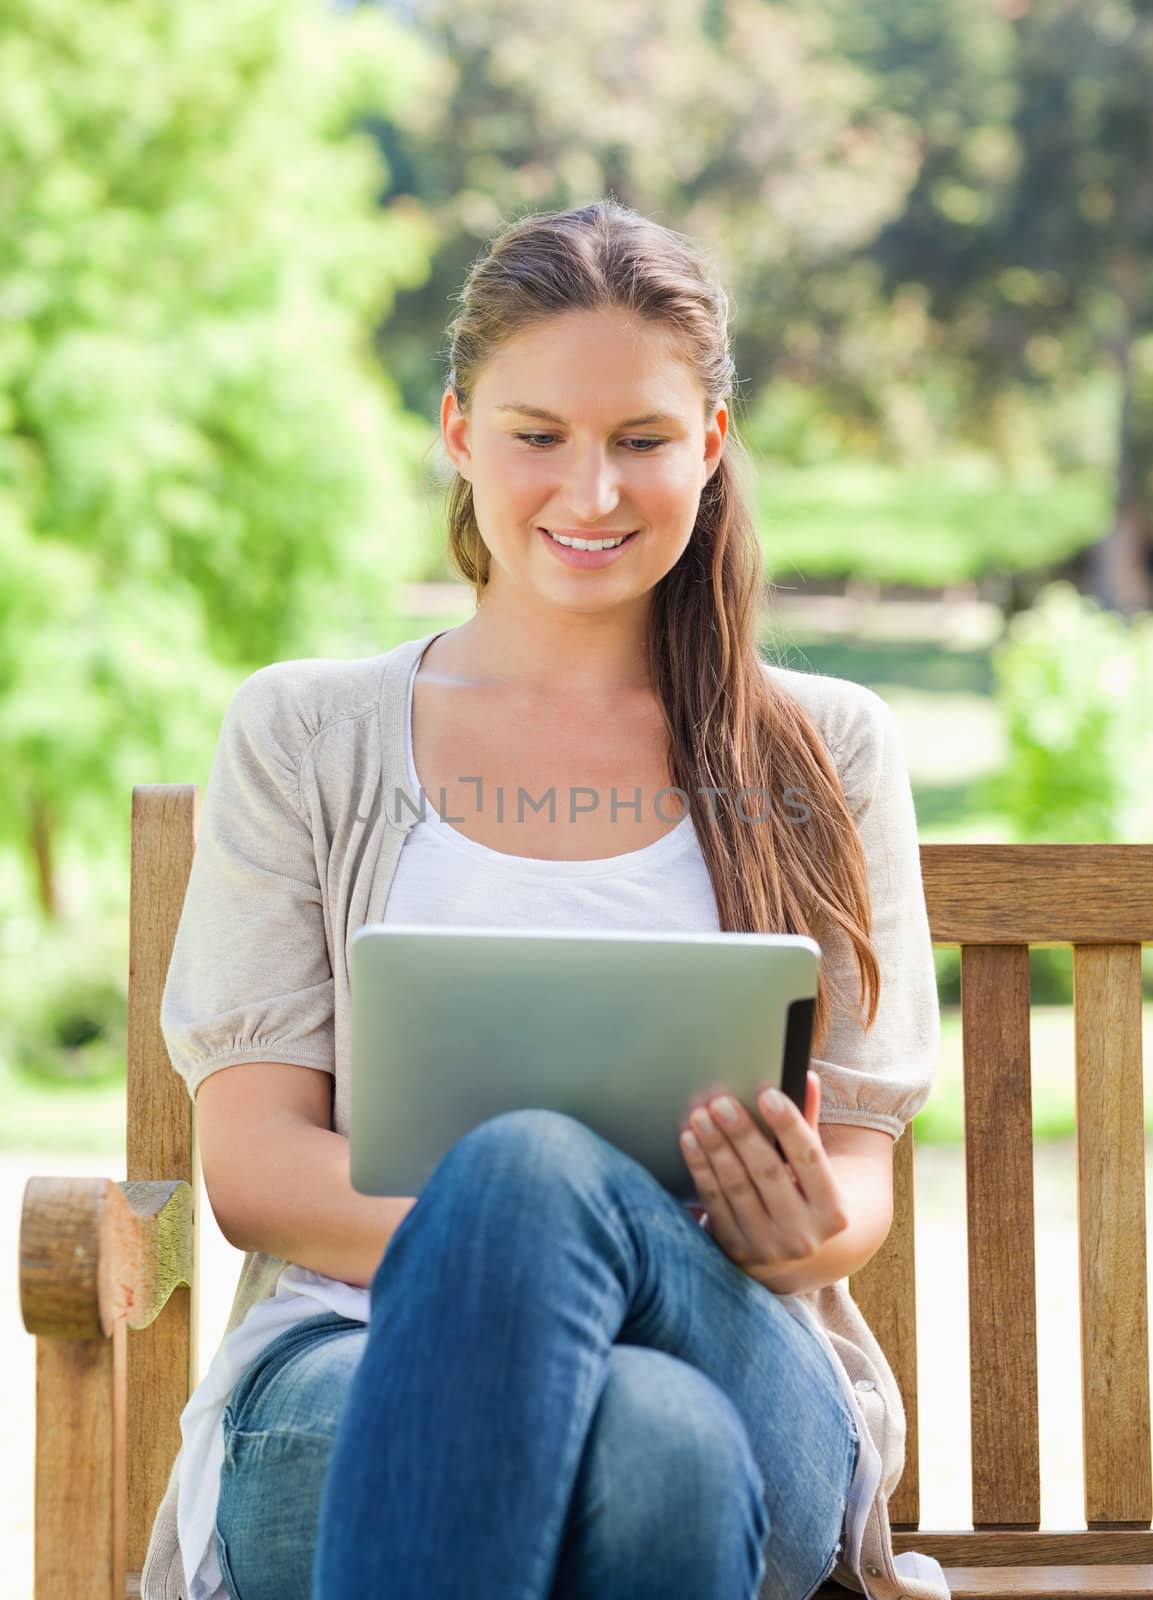 Smiling young woman using a tablet computer on a park bench